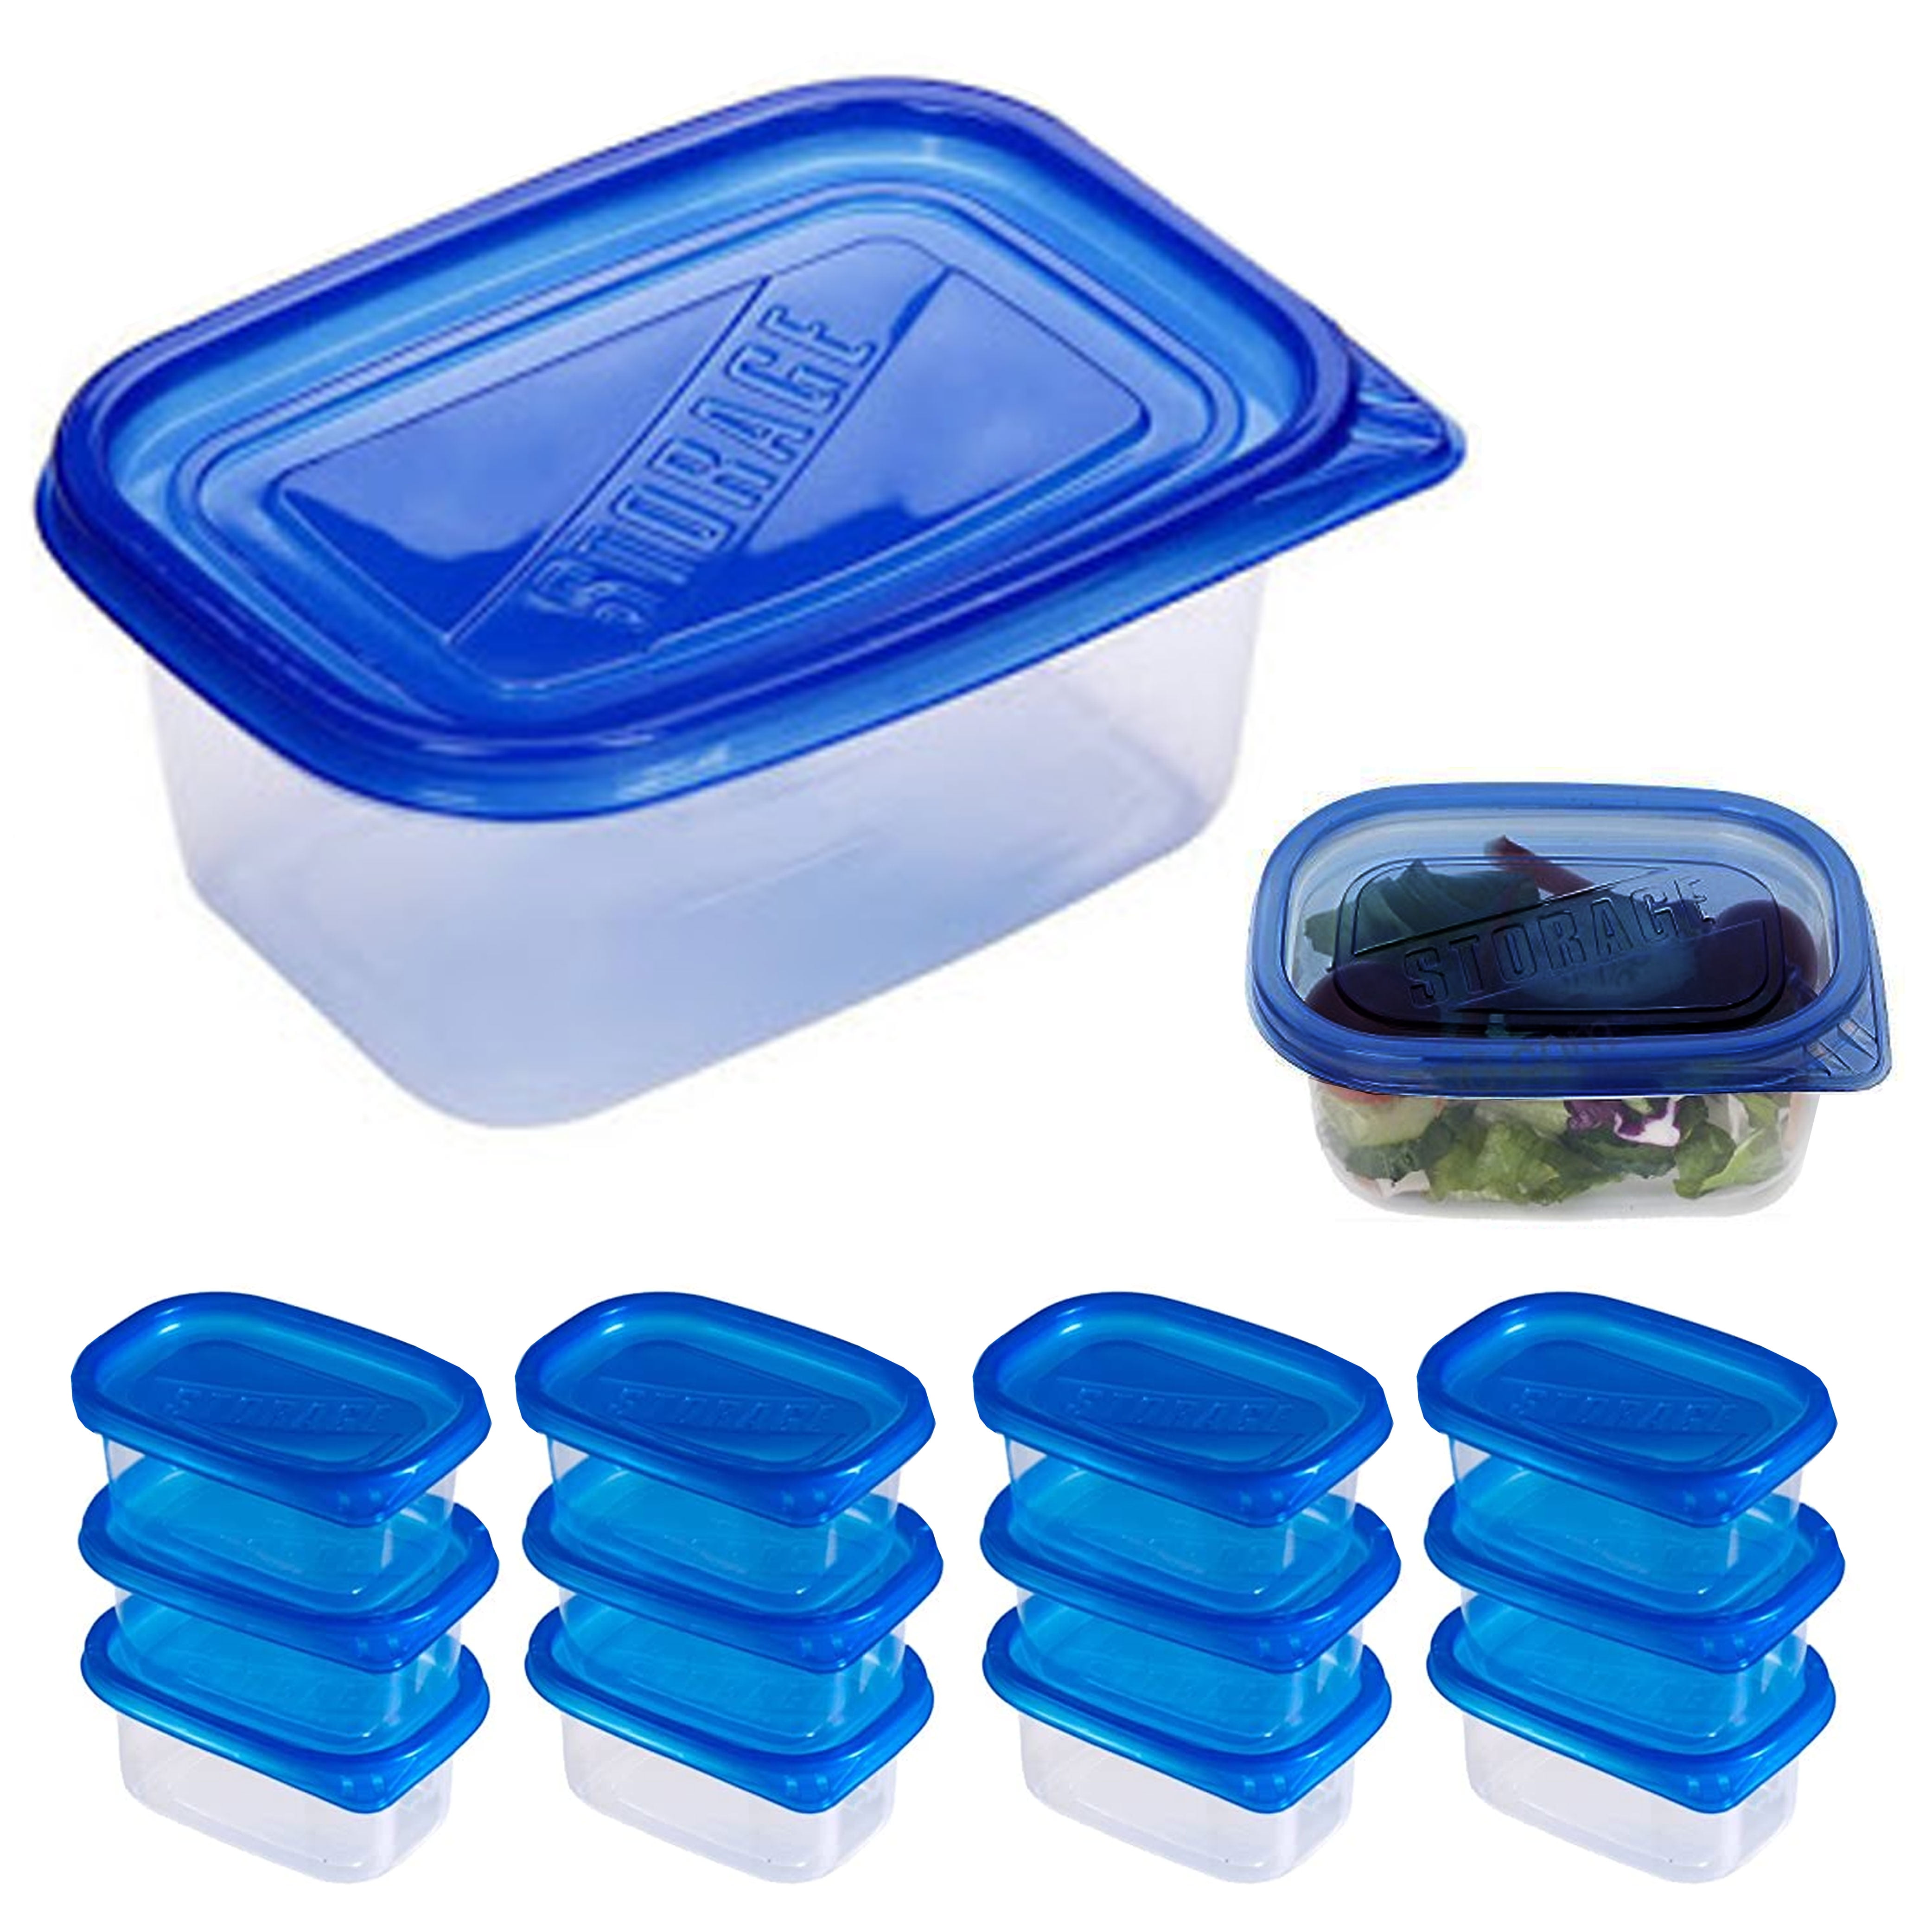 12 Pc Small Food Storage Container Meal Prep Freezer Microwave Reusable 9 5oz